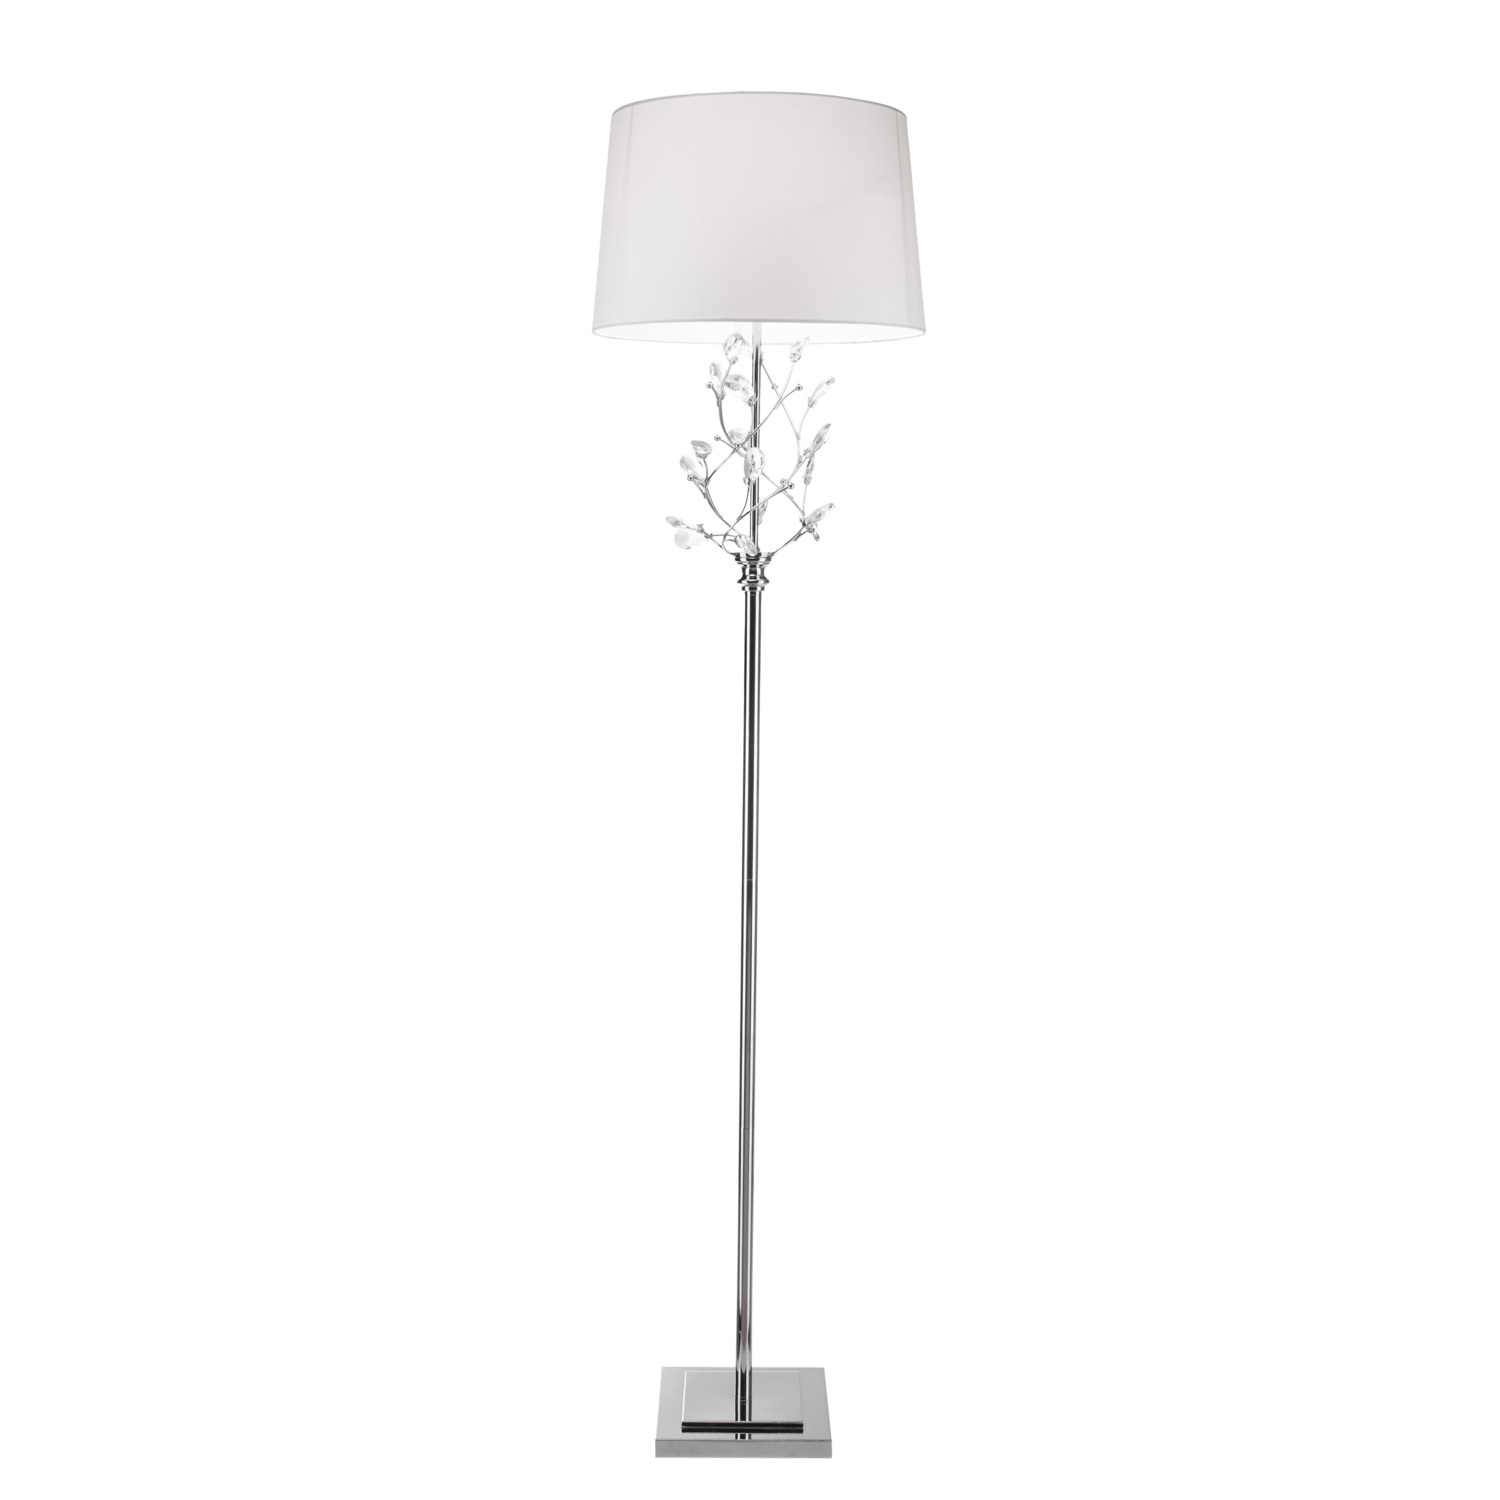 Crystal Leaf Floor Lamp pertaining to size 1500 X 1500